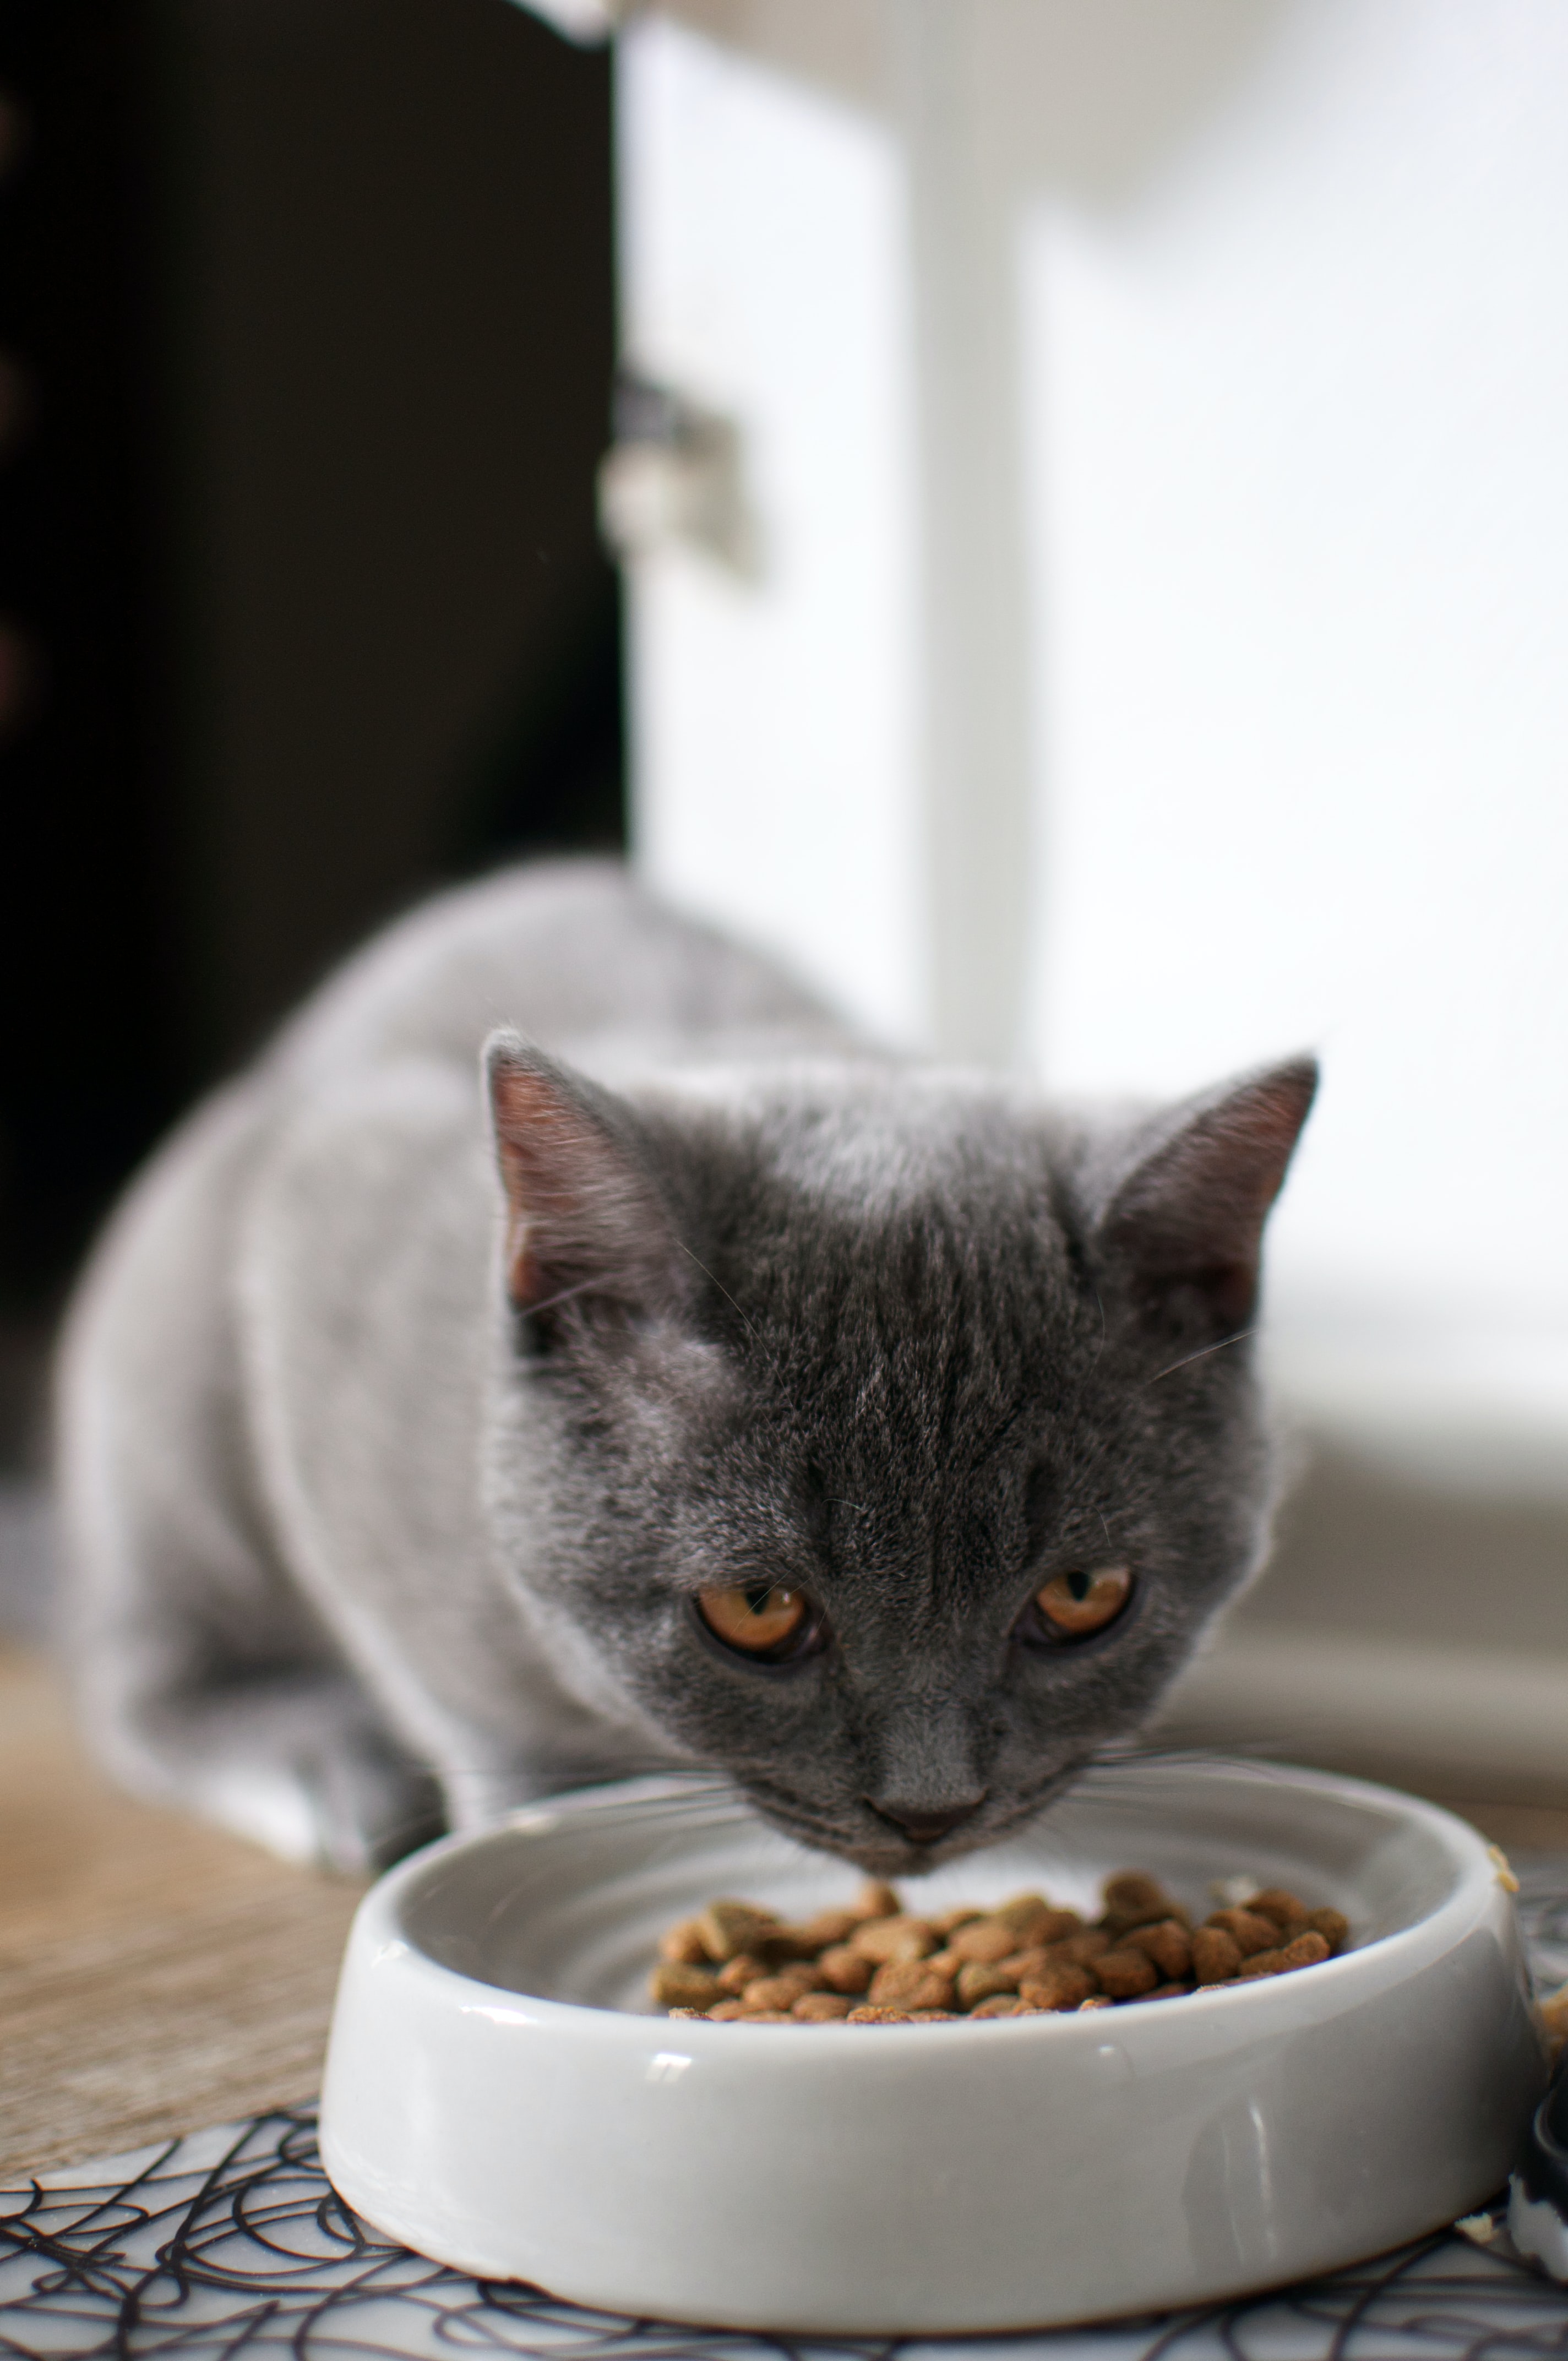 How To Tell Your Pet Has Allergies - cat eating kibble